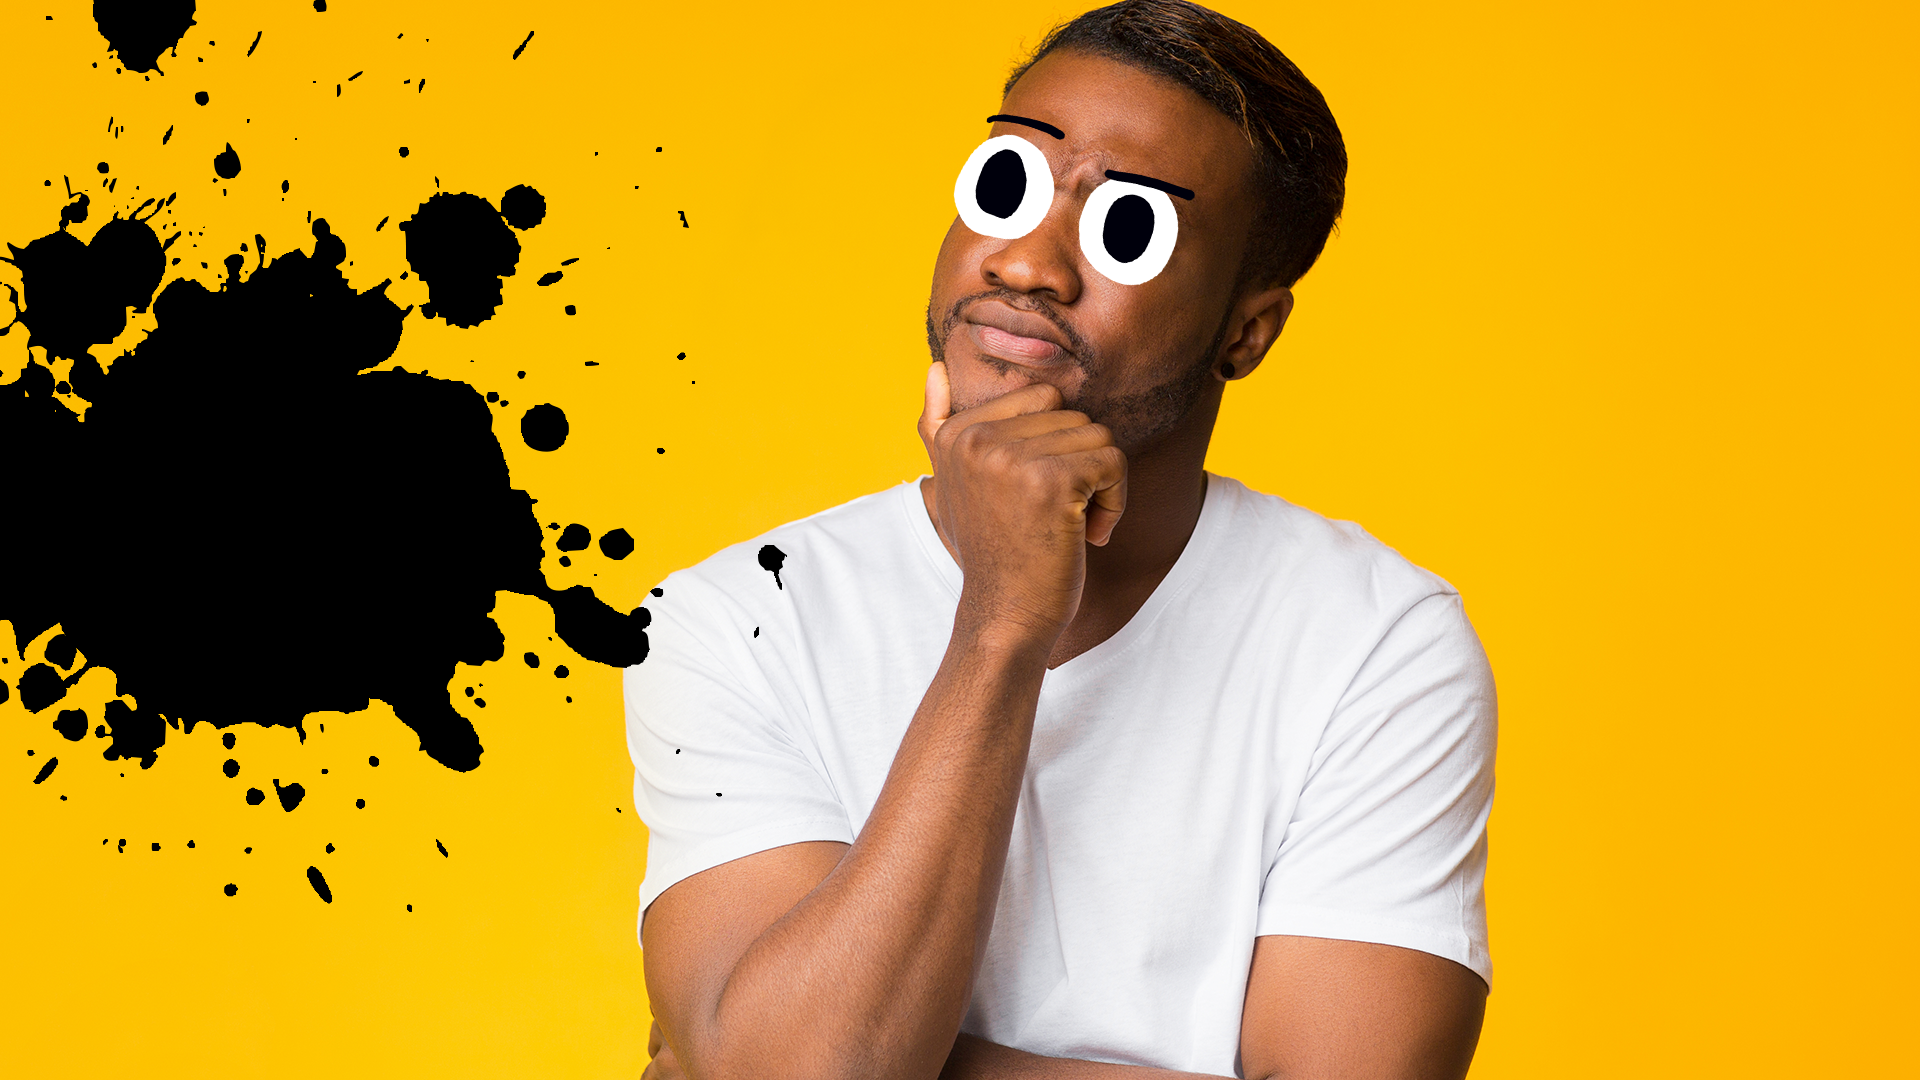 Man looking confused on yellow background with splat